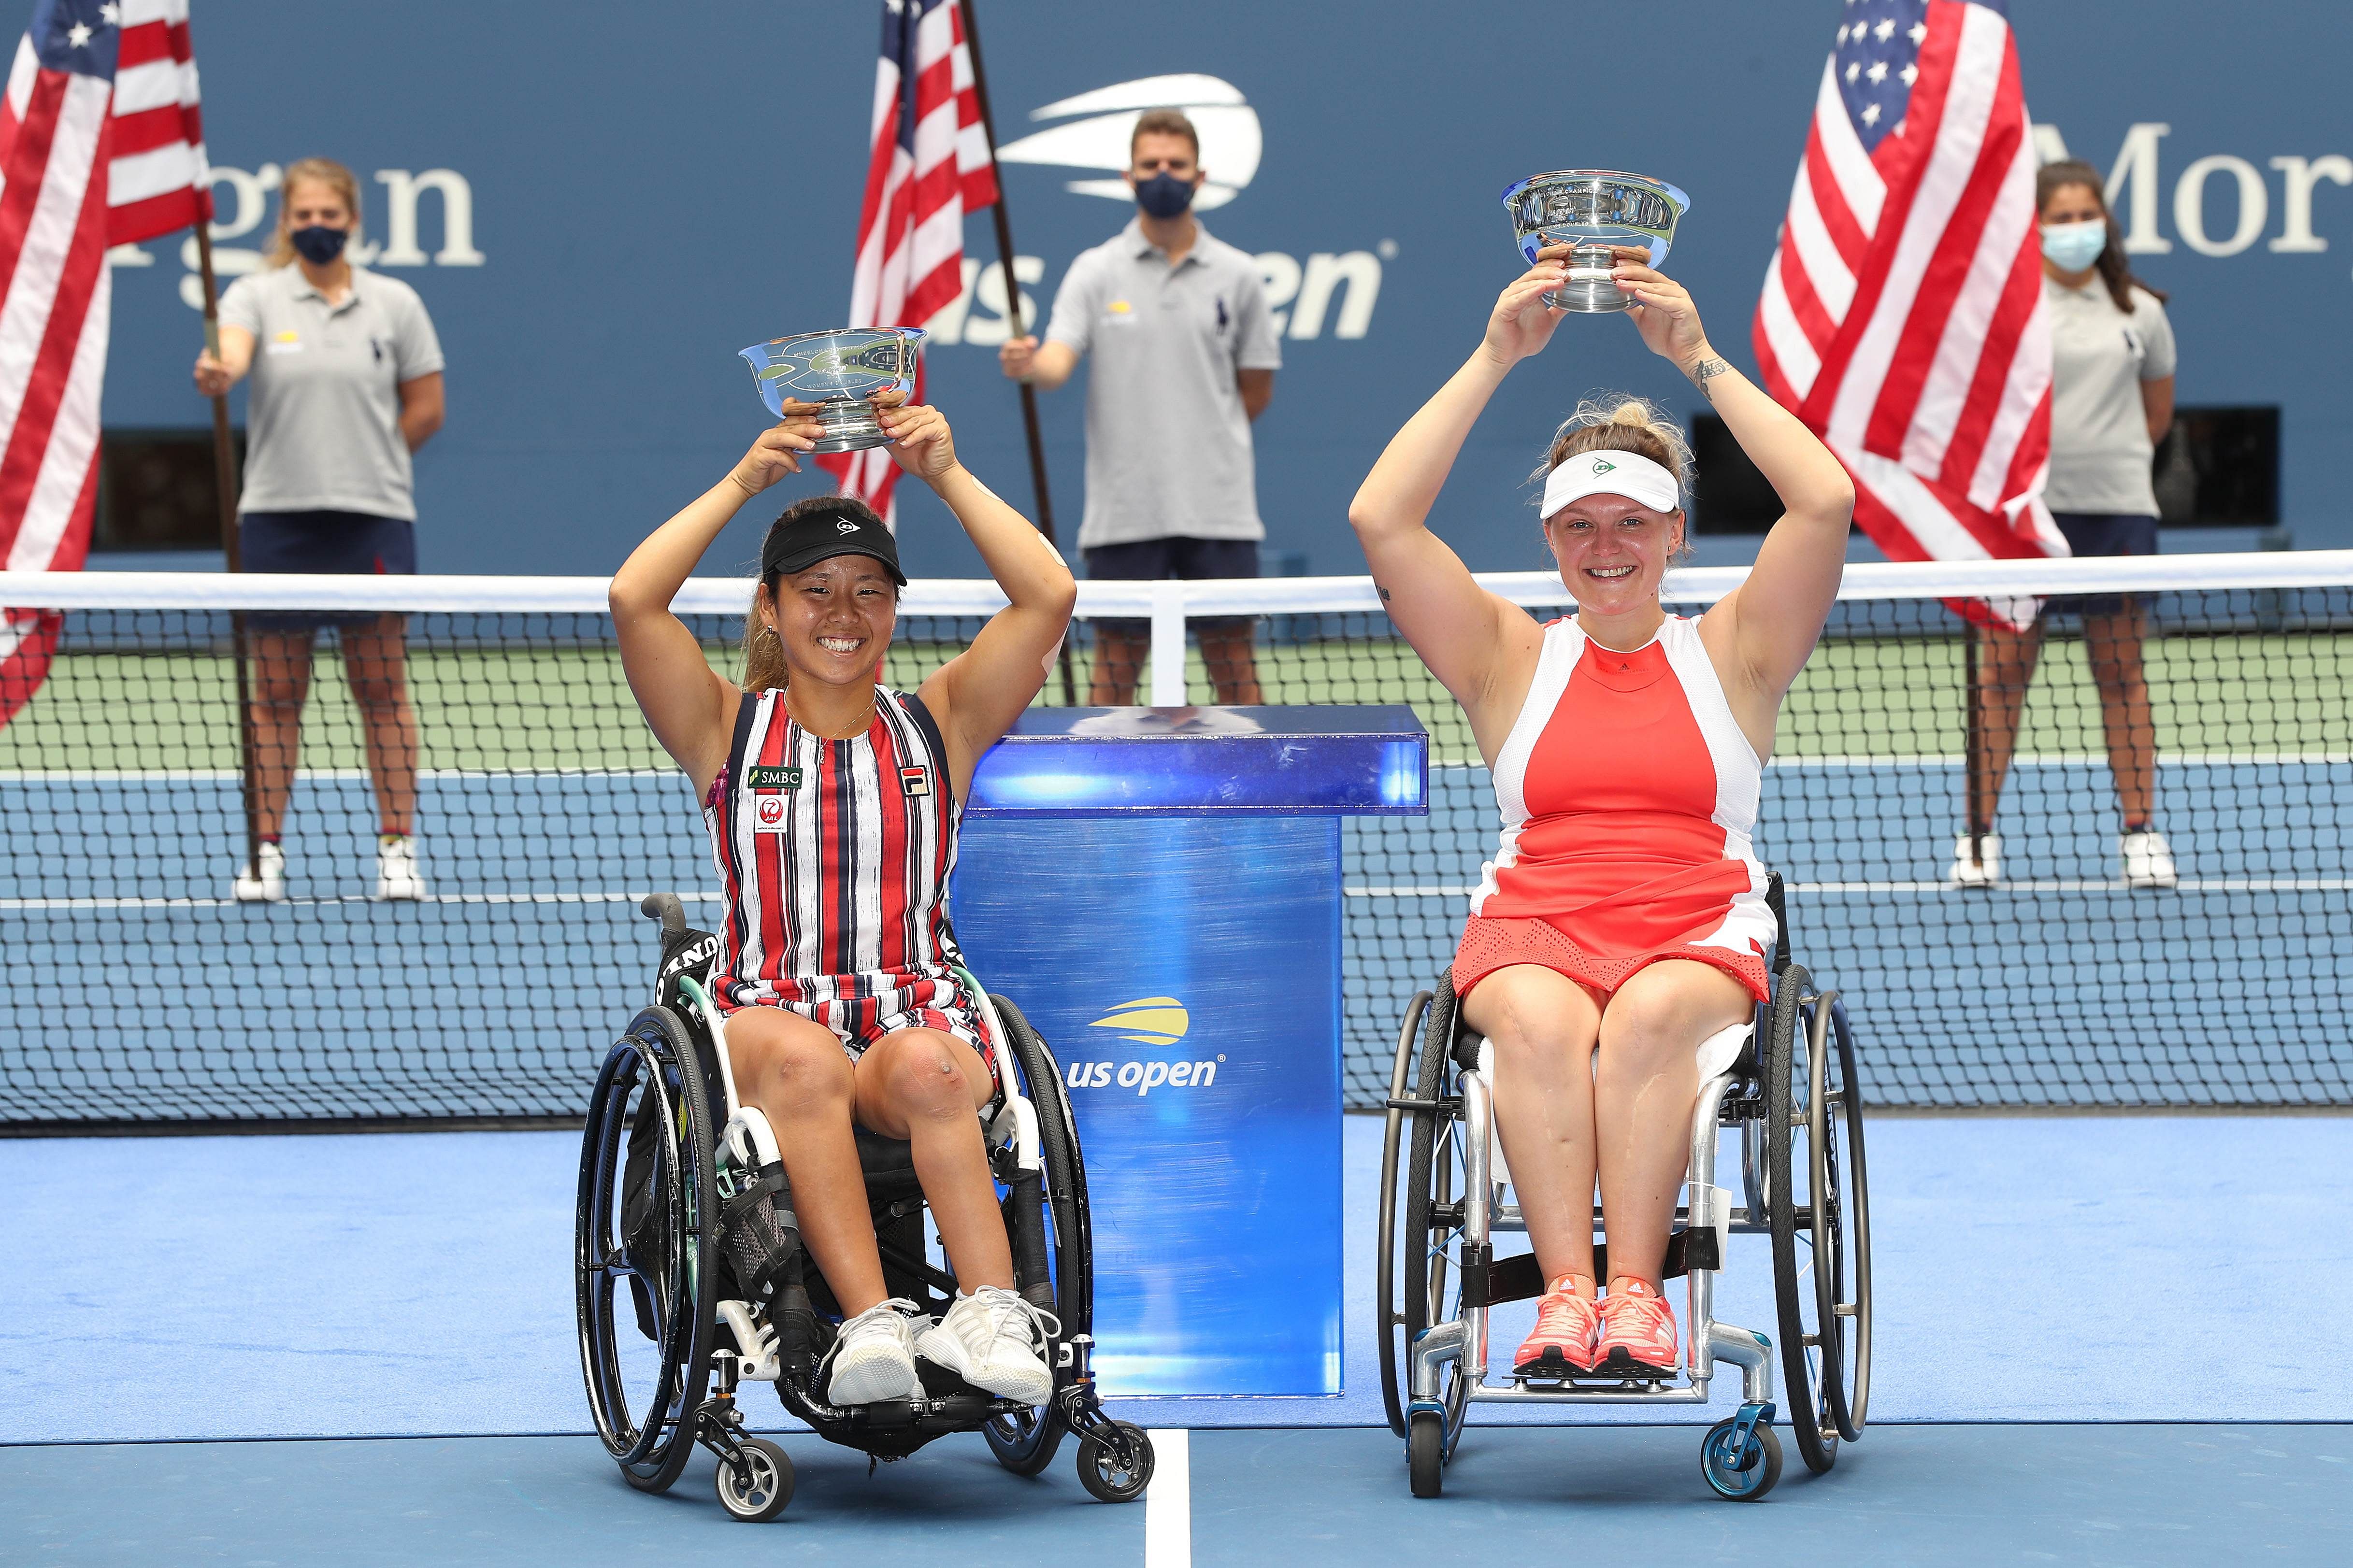 Yui Kamiji of Japan and Jordanne Whiley of Great Britain celebrate with their championship trophies after winning their Wheelchair Women's Doubles final match against Diede De Groot of the Netherlands and Marjolein Buis of the Netherlands on Day Fourteen of the 2020 US Open. Credit: AFP